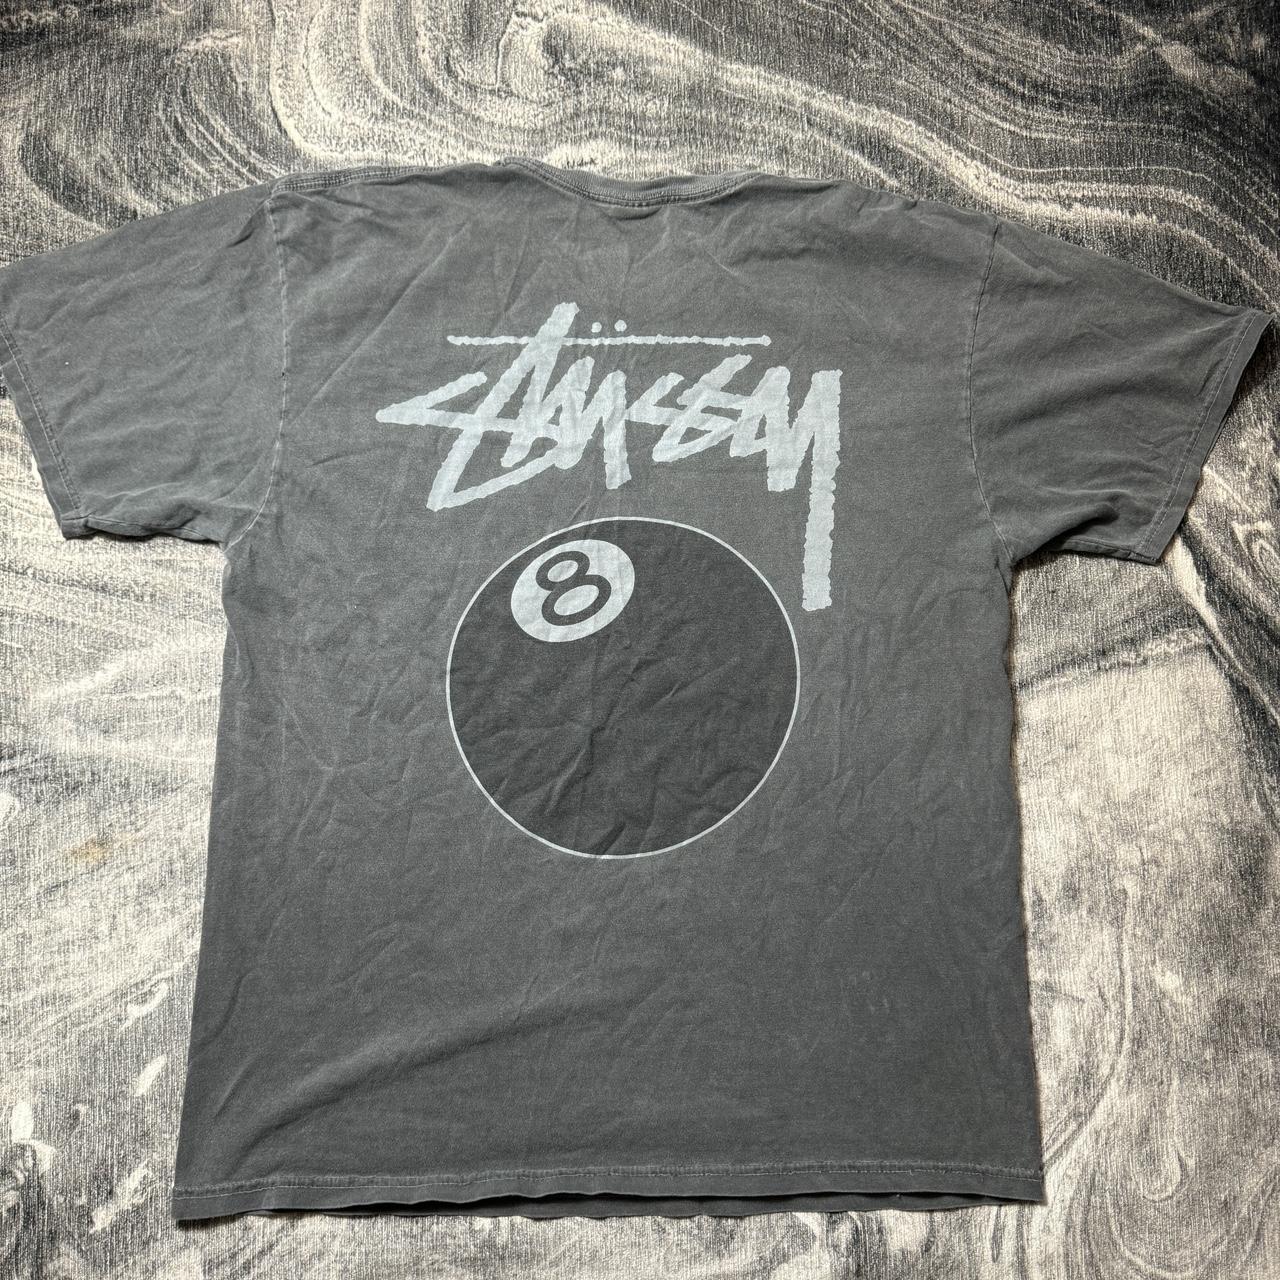 Stüssy Graphic T-Shirt Grey large Pre owned Does... - Depop